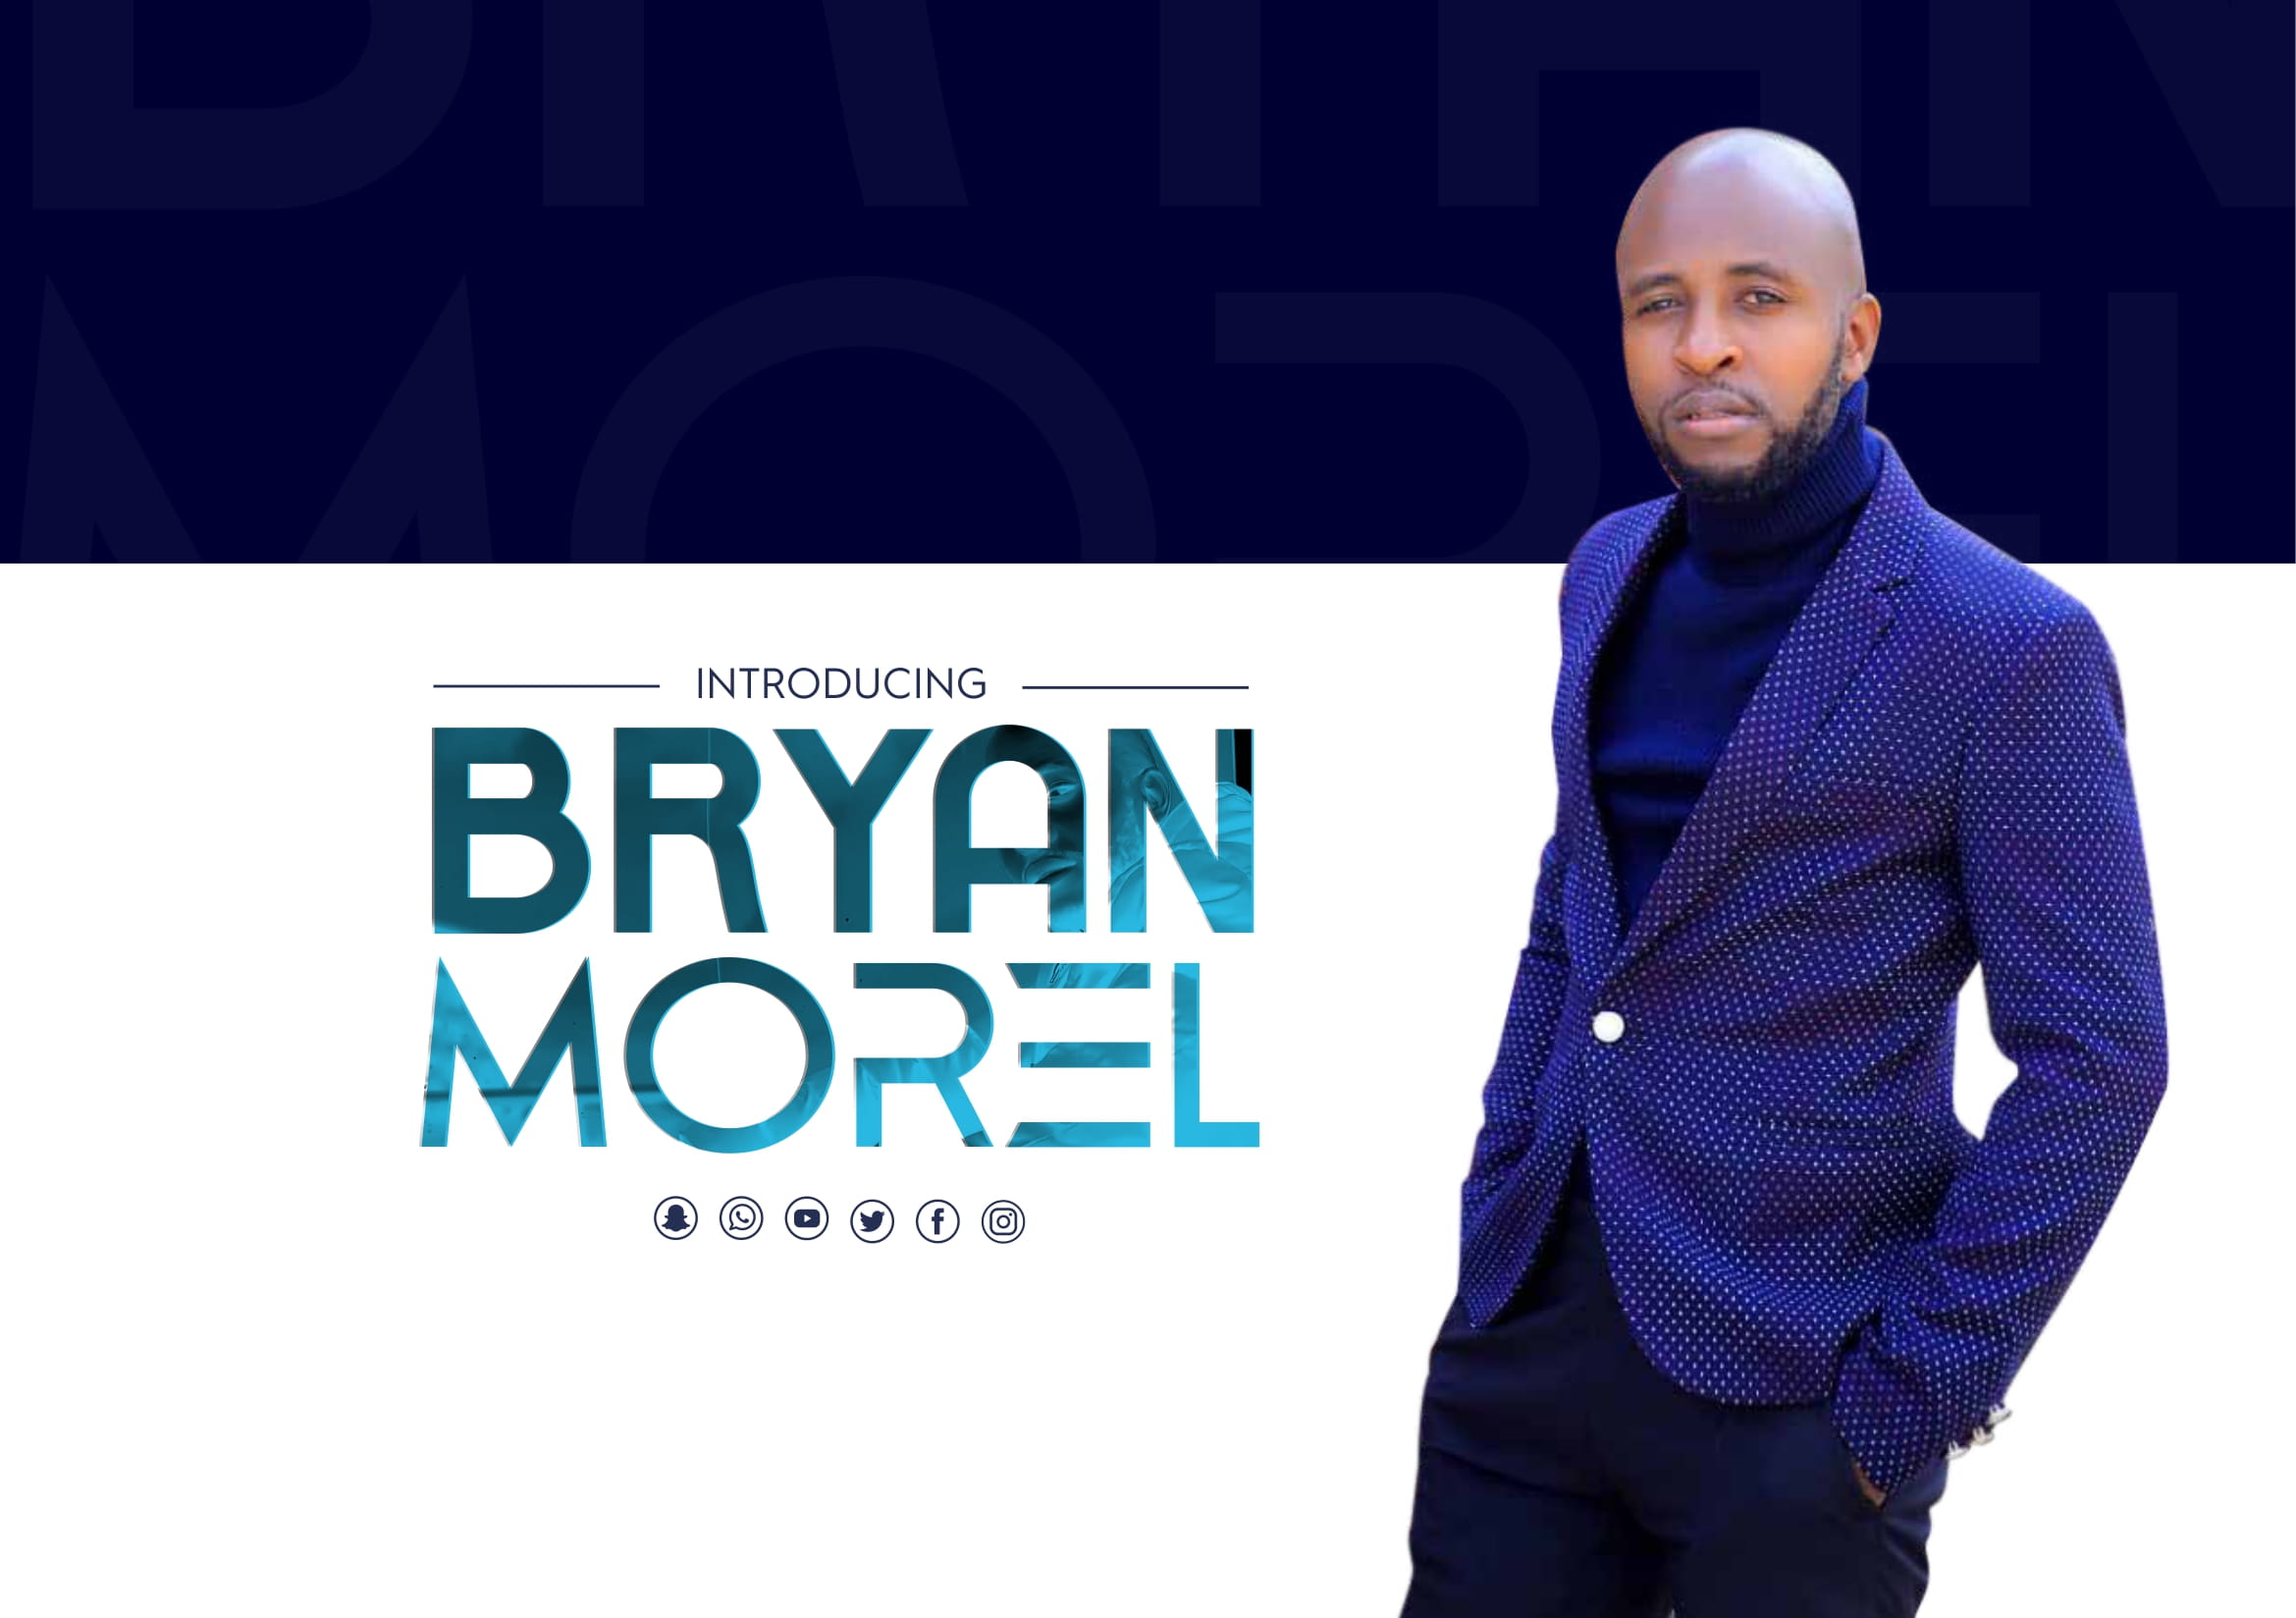 Bryan Morel: The Interesting Life of a PR and Communications Supreme